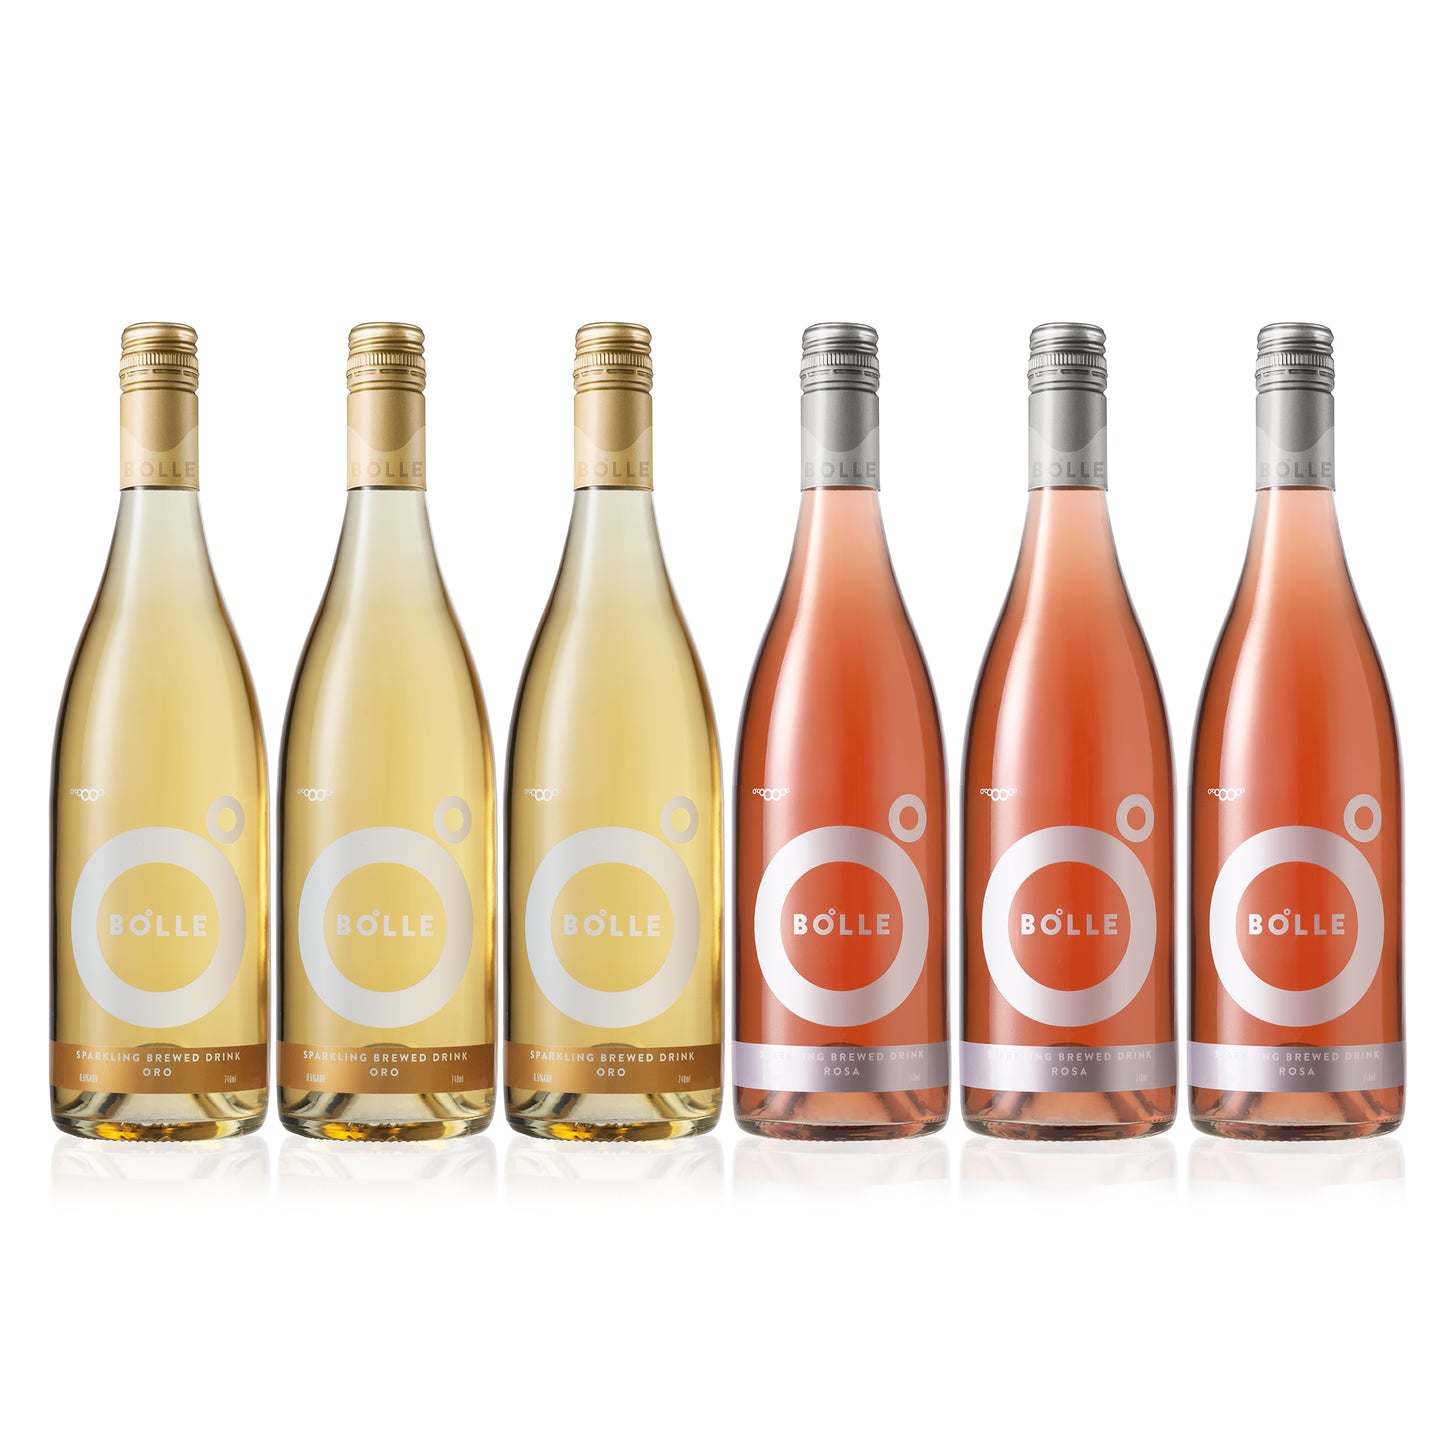 Duo sets of ORO and ROSA alcohol-free sparkling wine